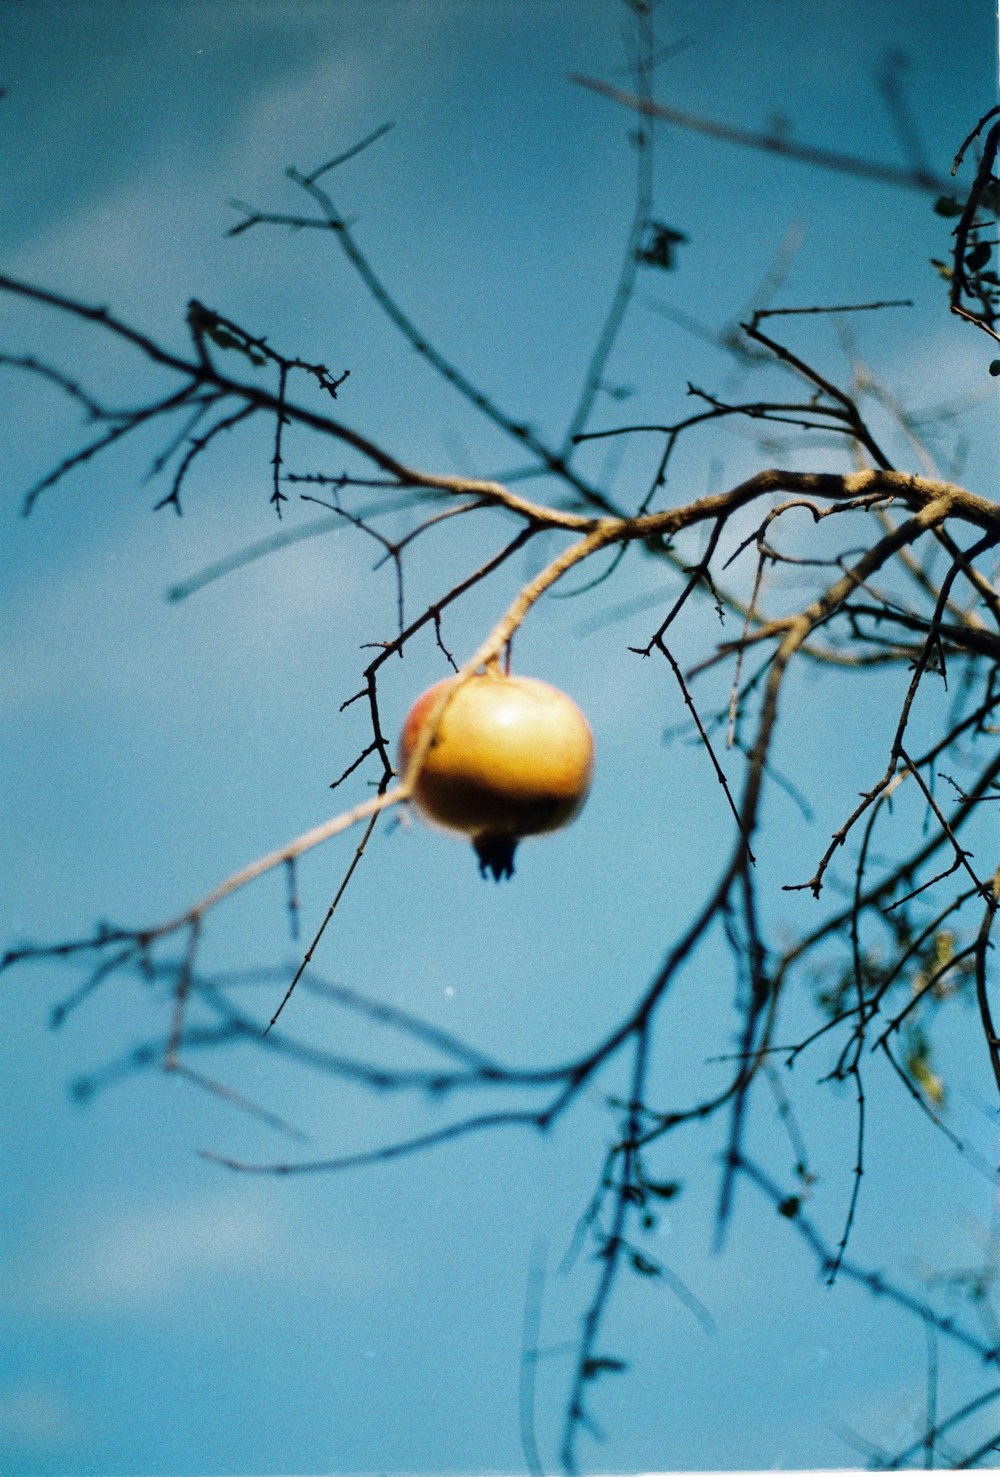 a fruit hanging from a tree branch with a blue sky in the background